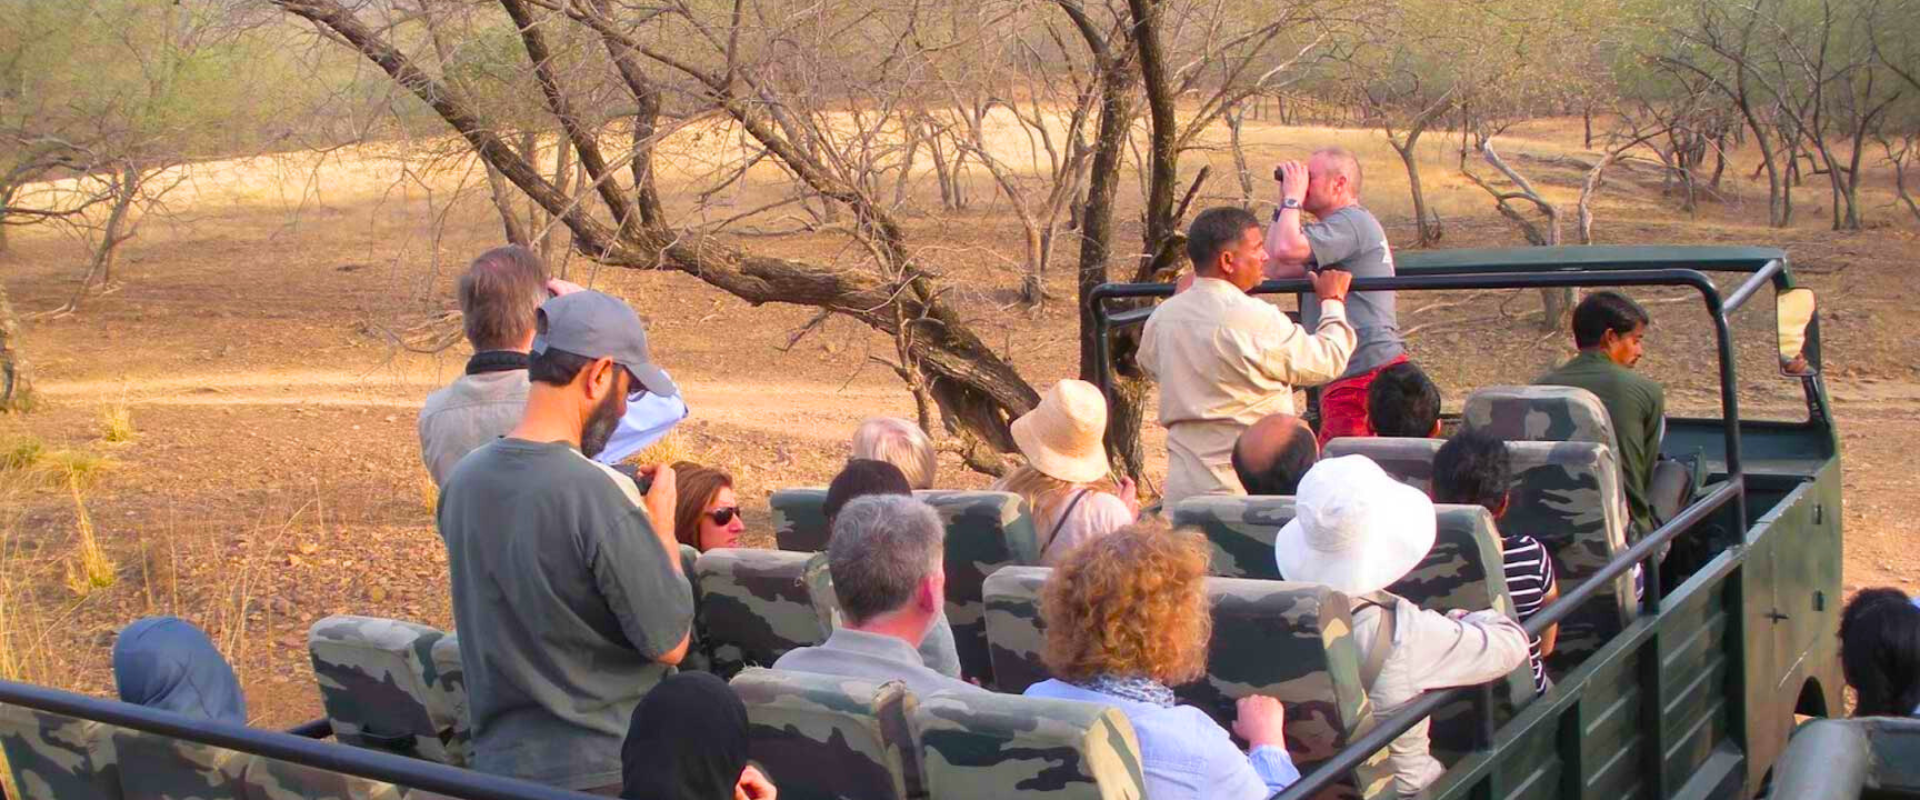 Canter Safari In Ranthambore Online - Book Now